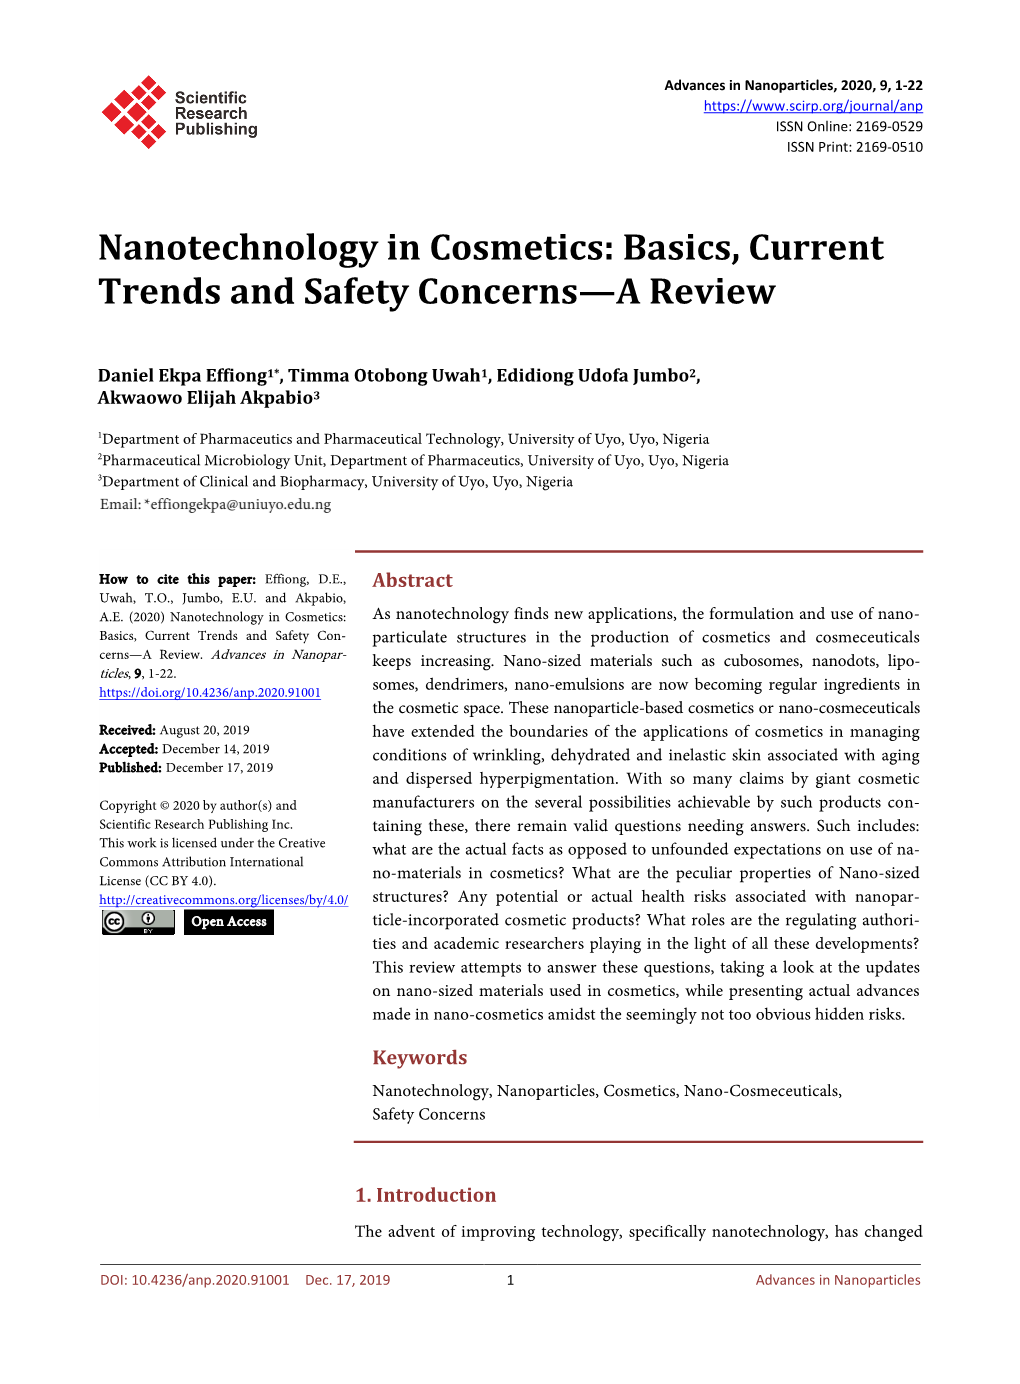 Nanotechnology in Cosmetics: Basics, Current Trends and Safety Concerns—A Review